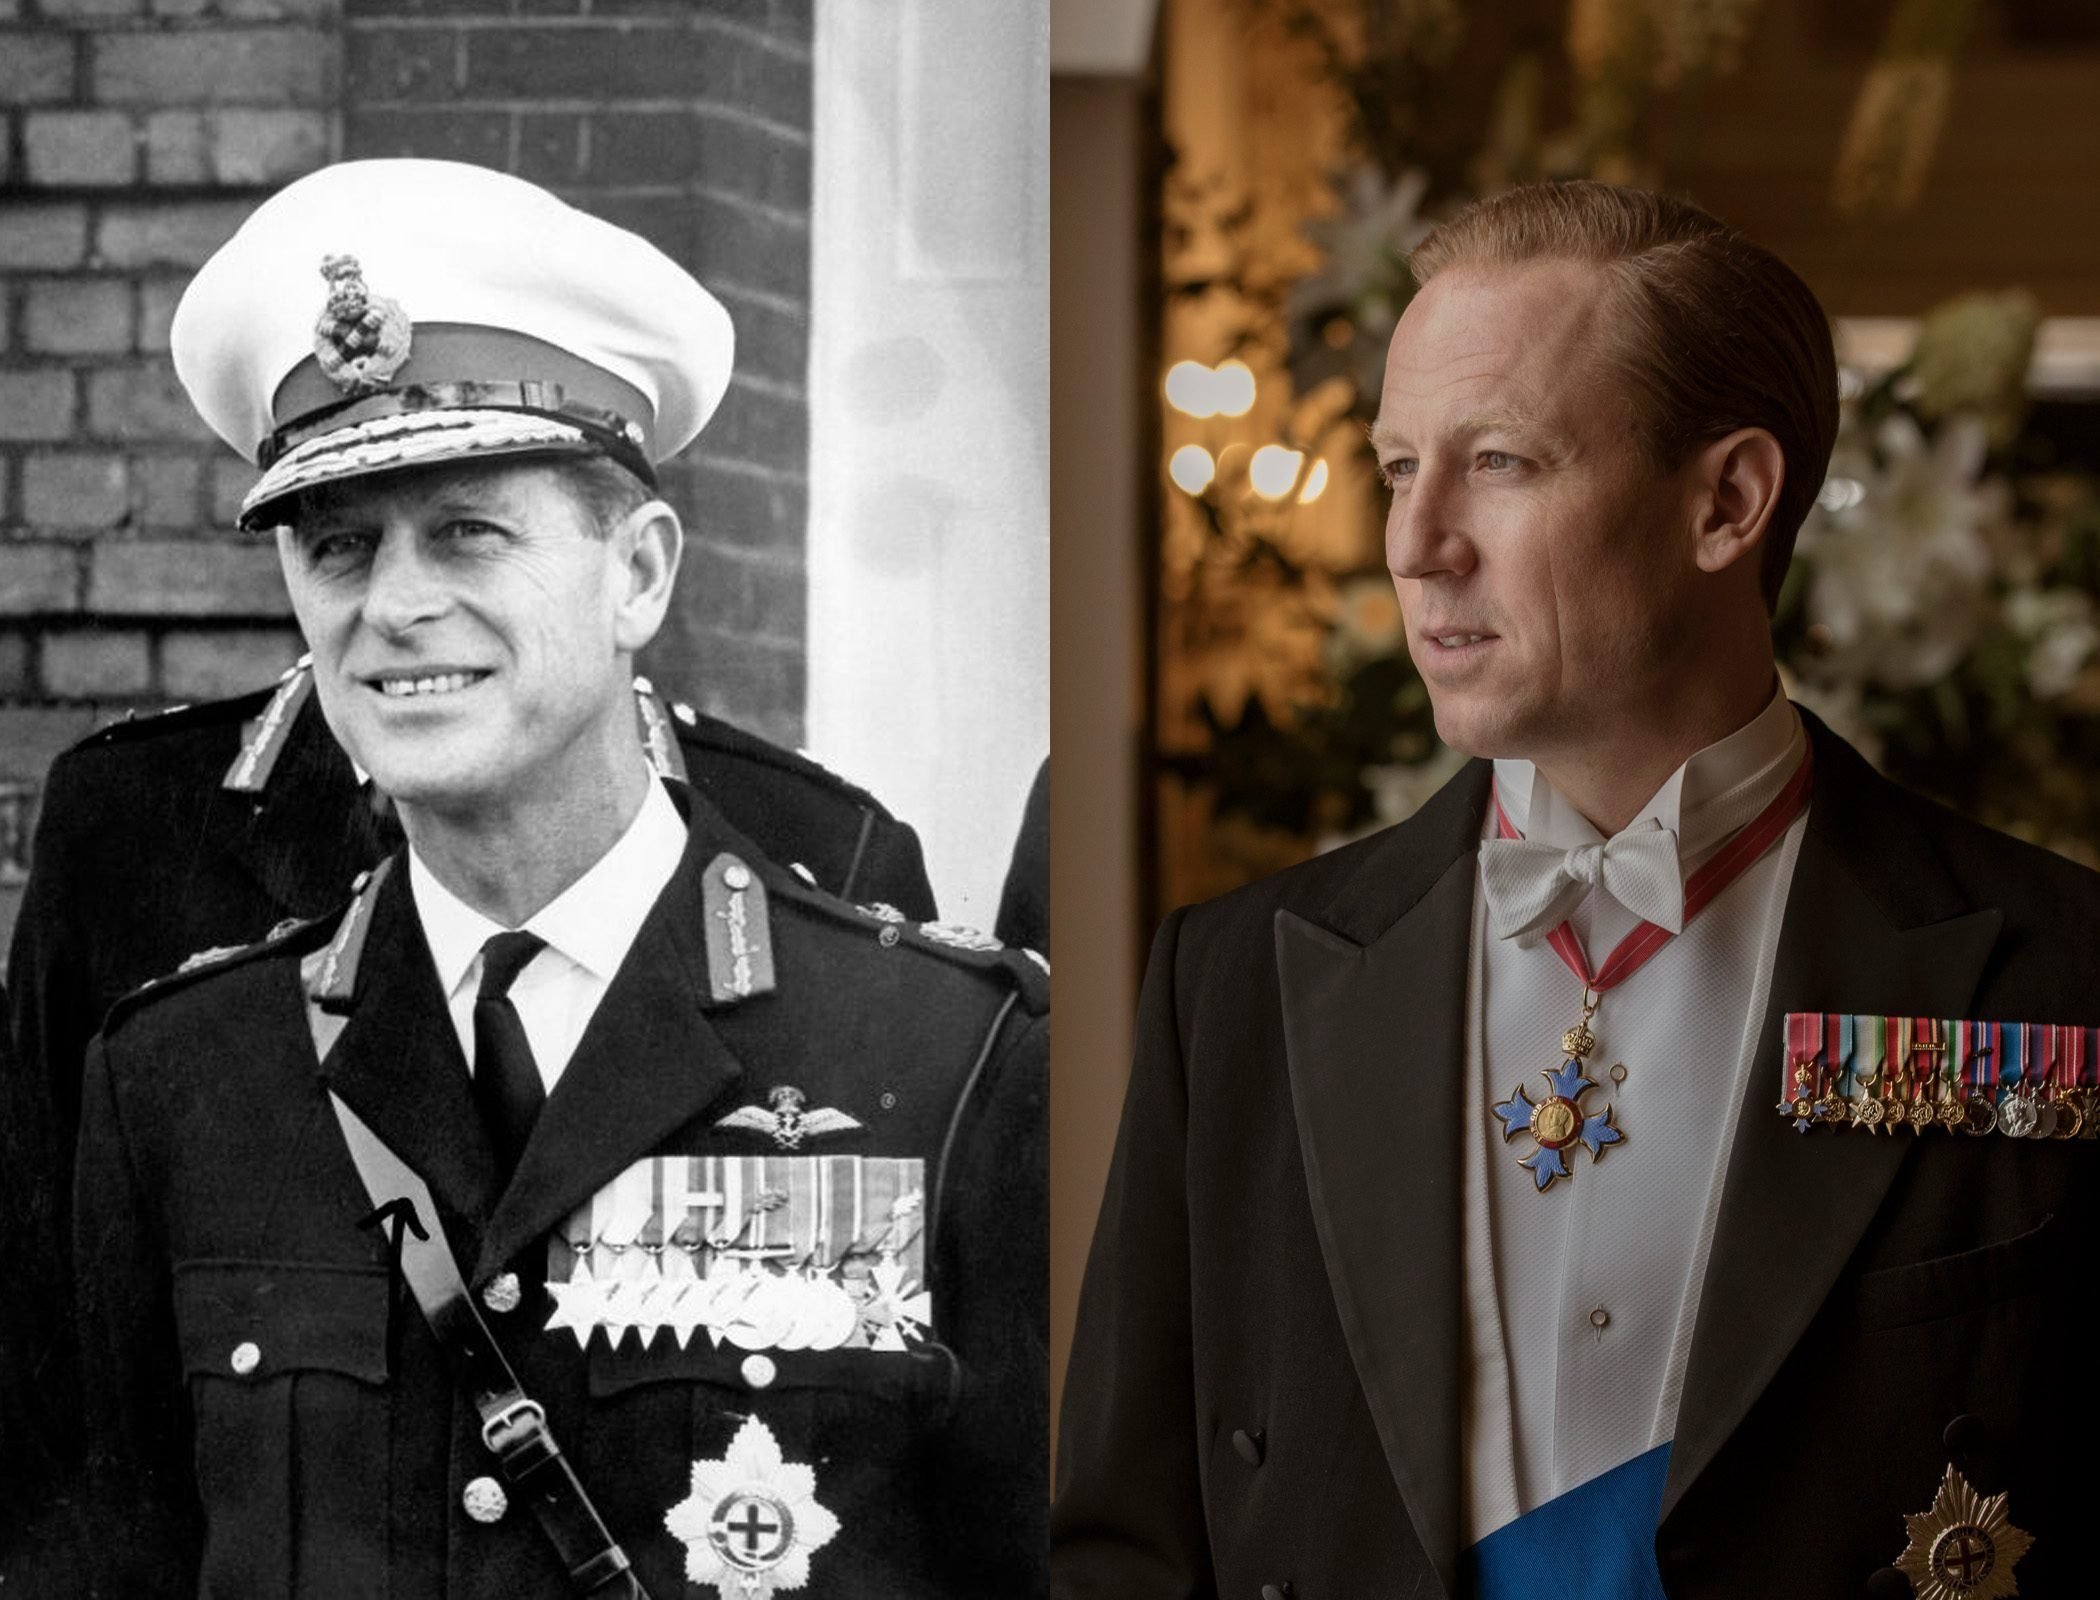 Prince Philip in middle age, as played by Tobias Menzies